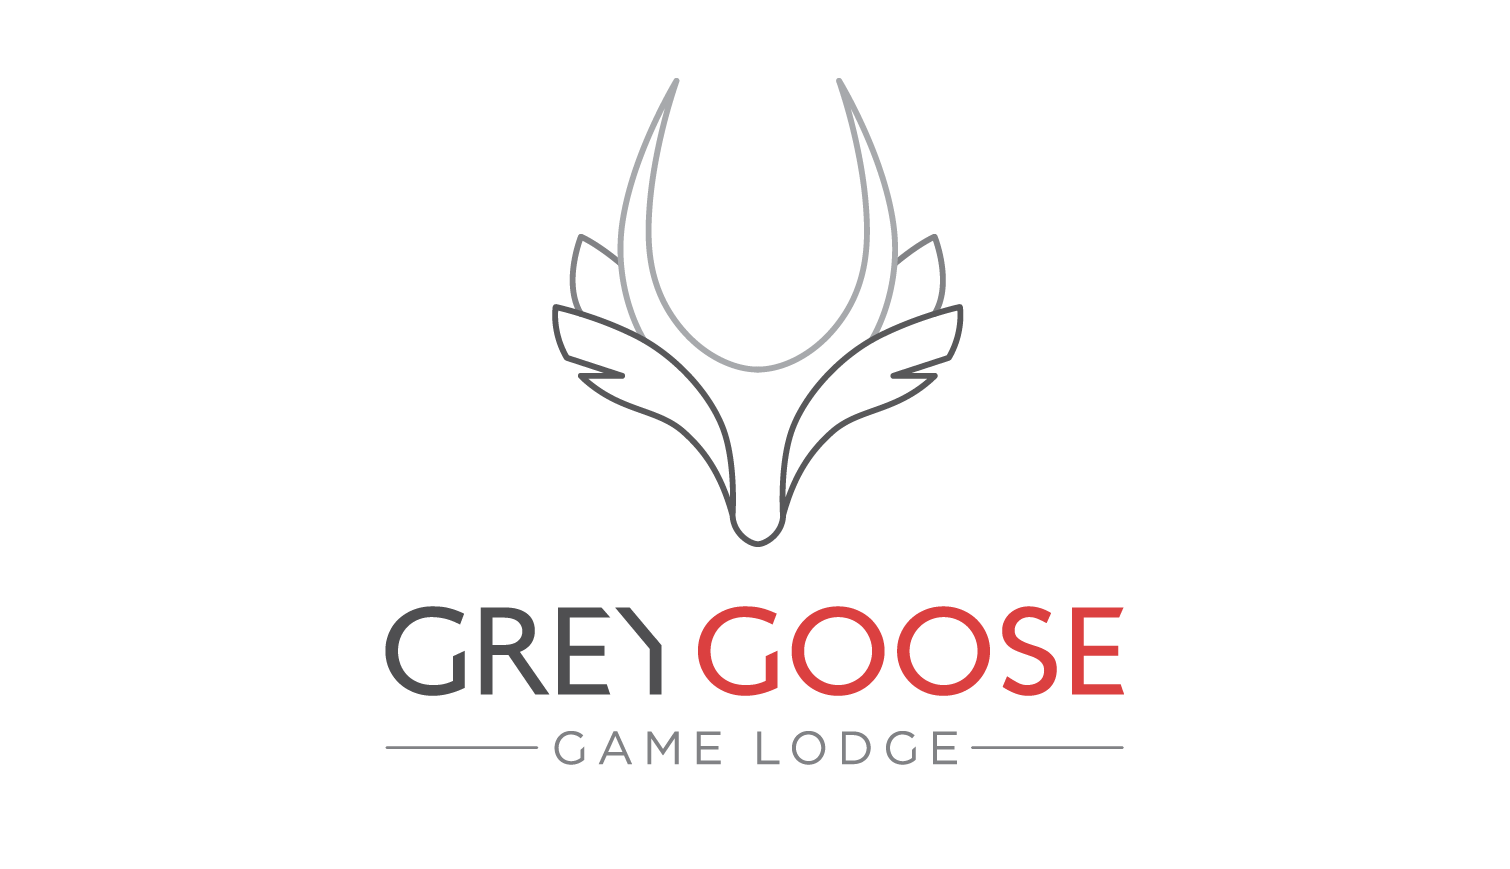 Grey Goose Logo - We will make your stay remarkable. Grey Goose Game Lodge